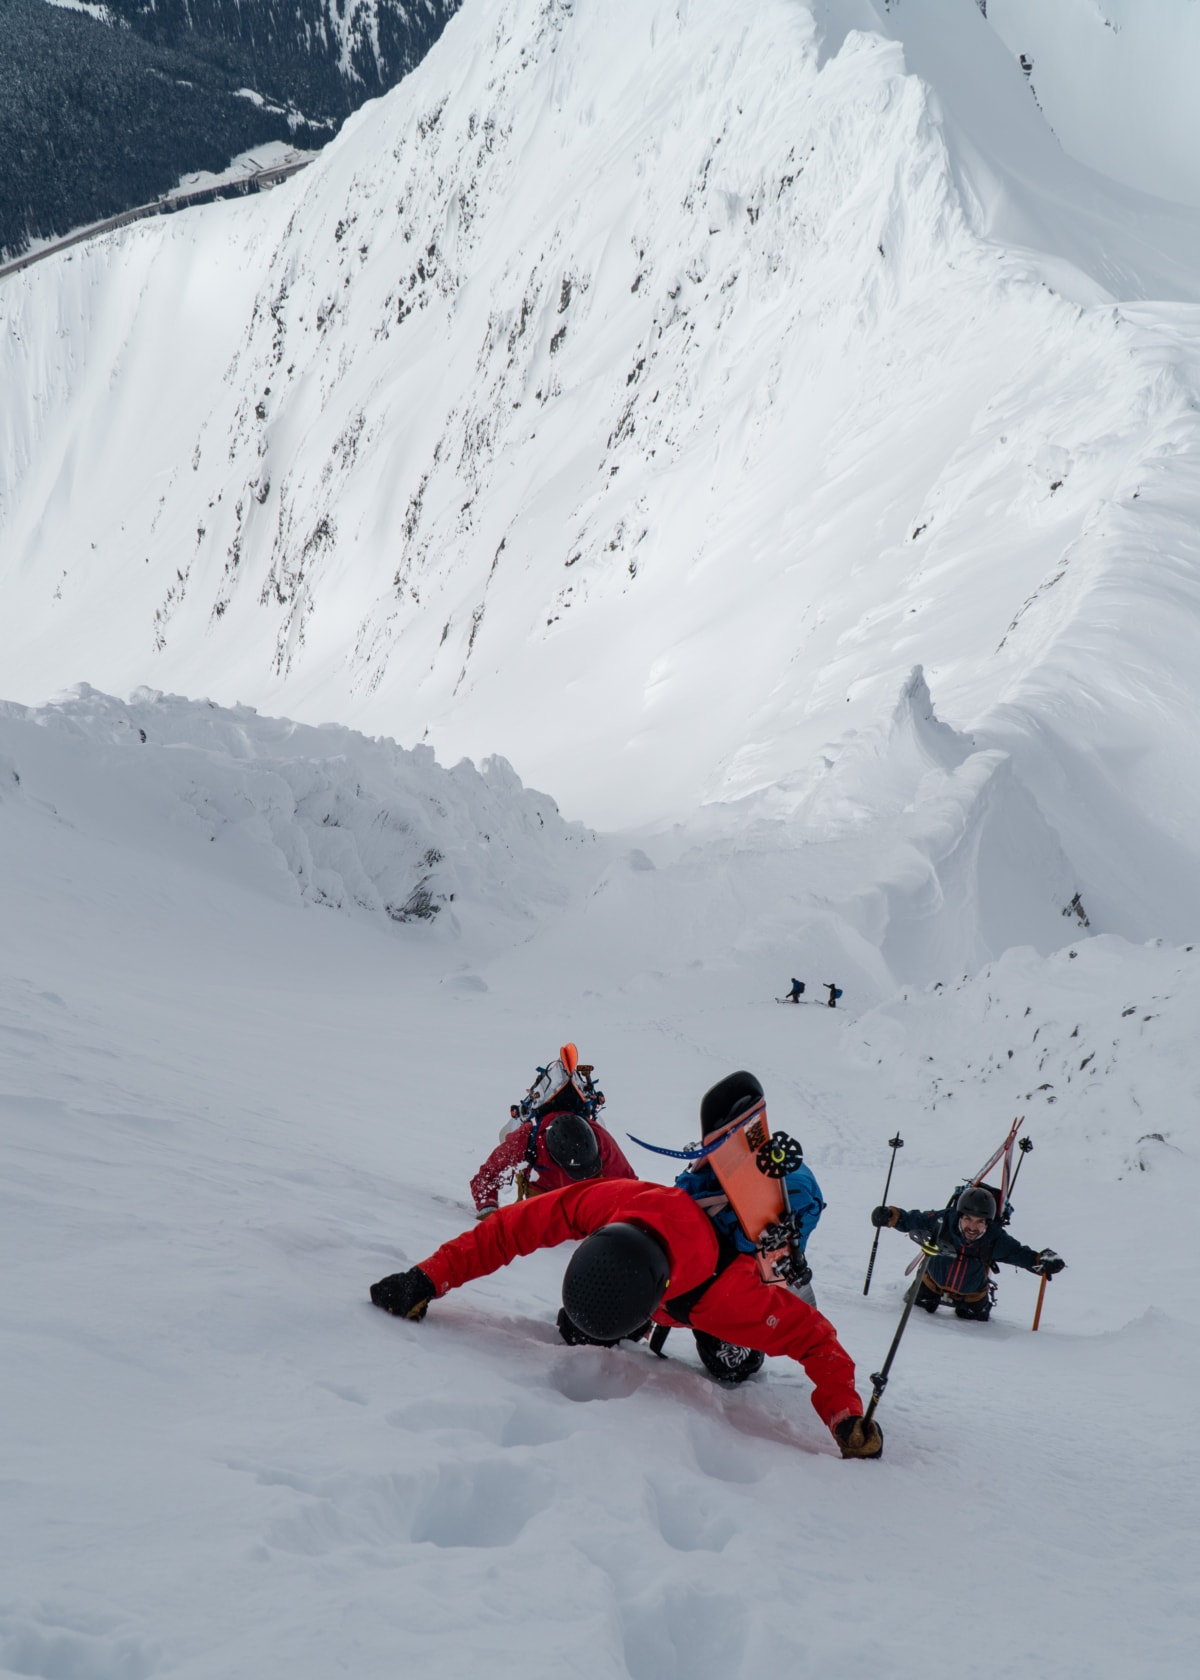 group of skiers booting up a steep snowy slope at rogers pass